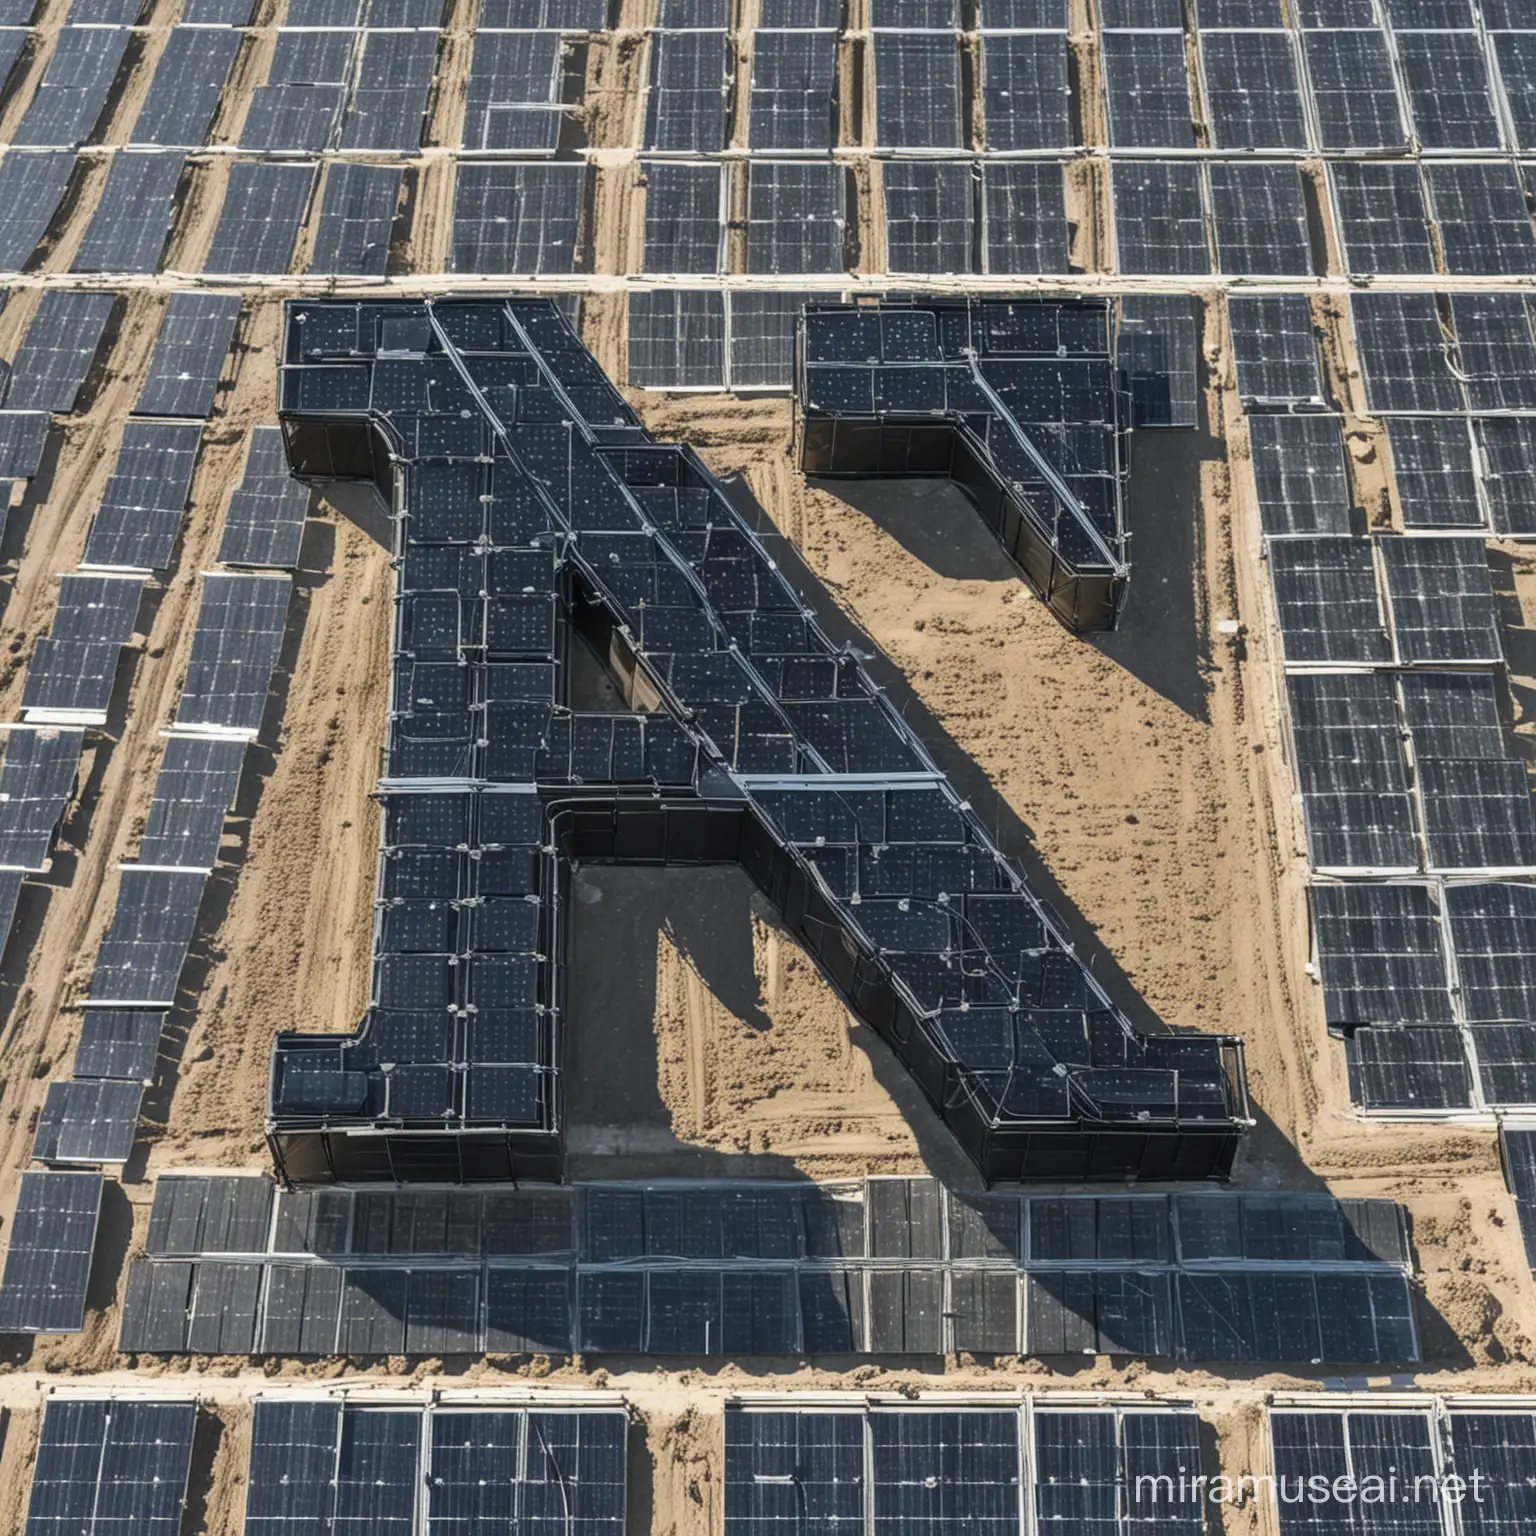 Big Letter N, front view, made of solar panels.